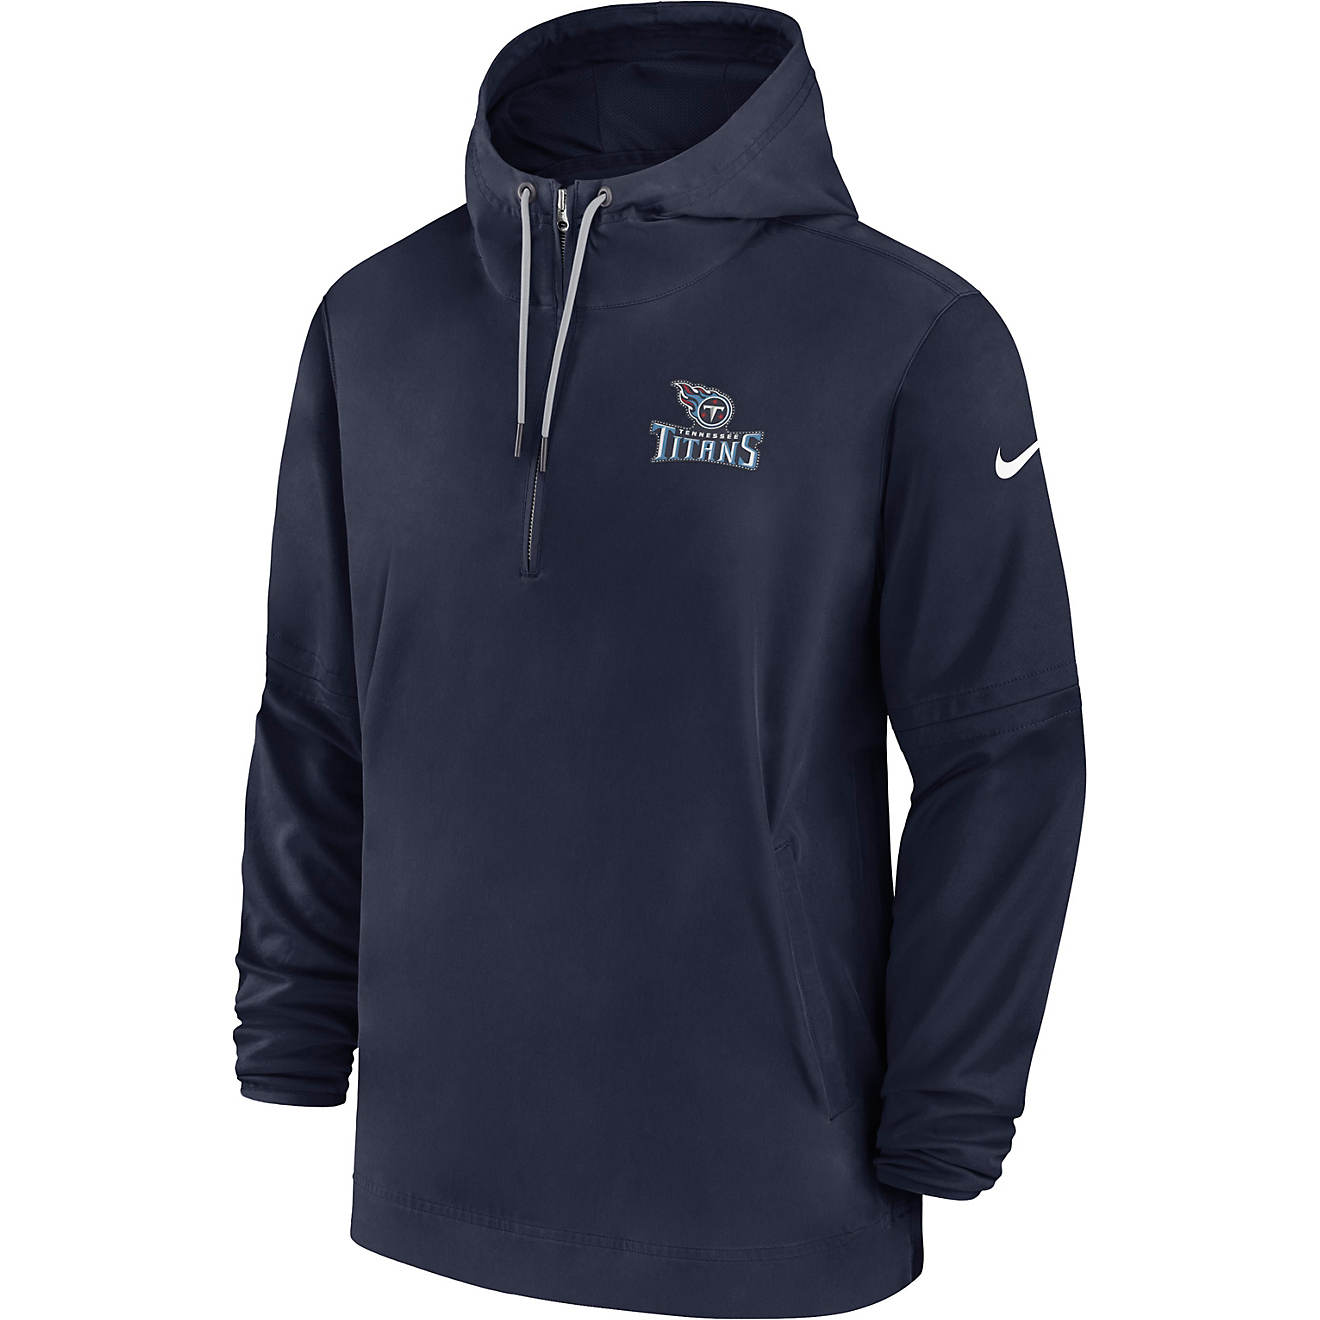 Nike Men's Tennessee Titans 1/2 Zip Hooded Top | Academy